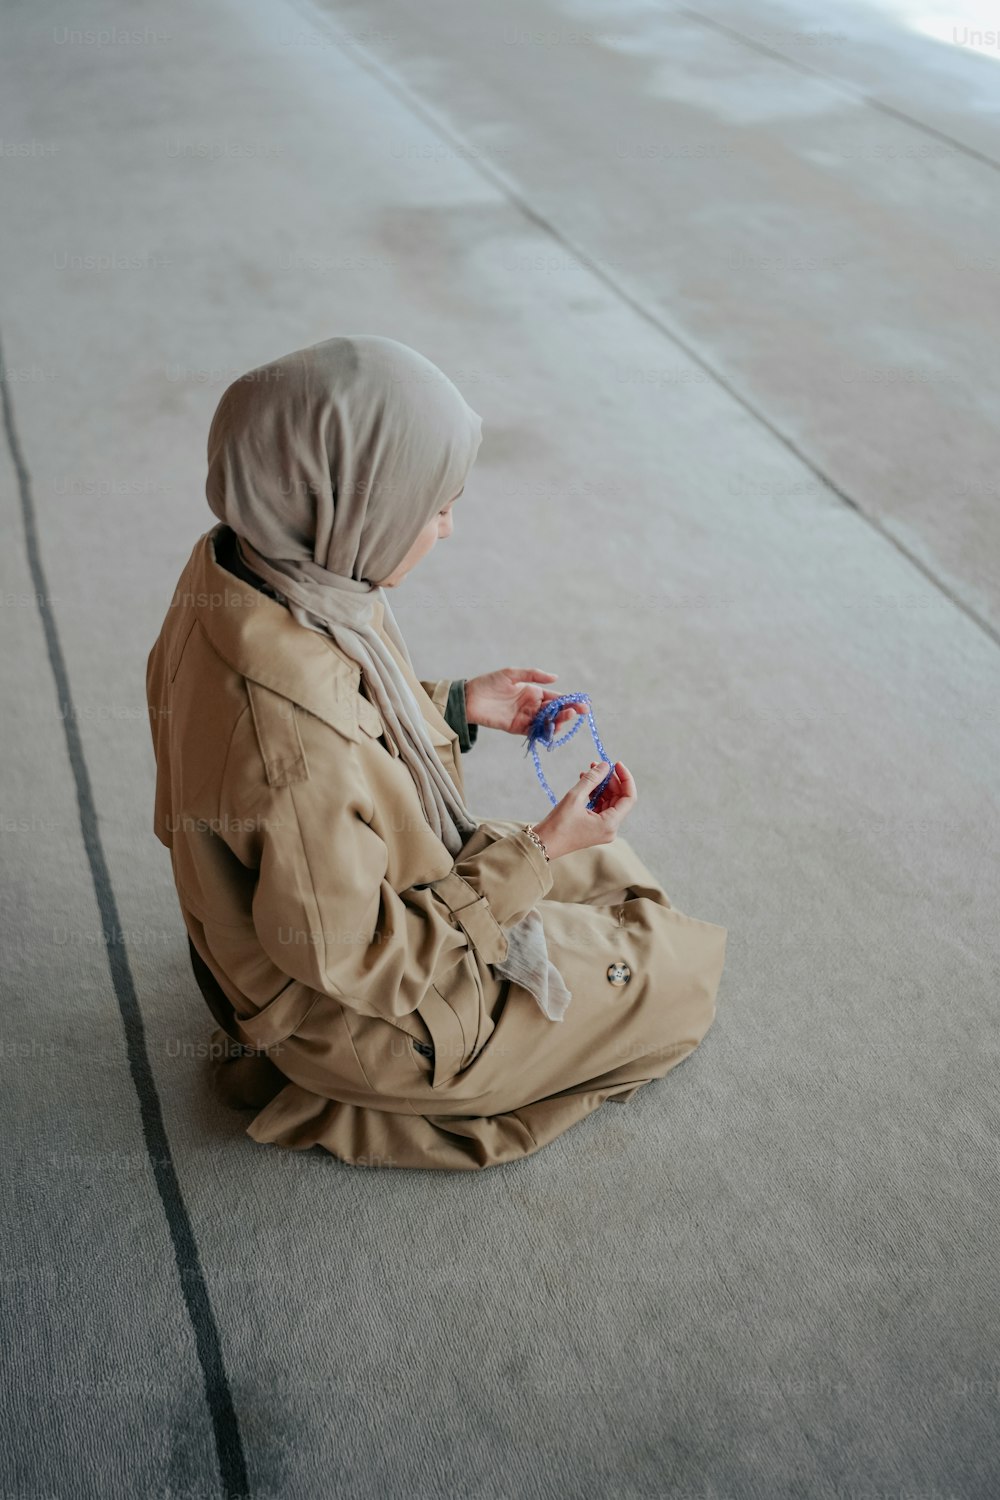 a person sitting on the ground with a bottle of water